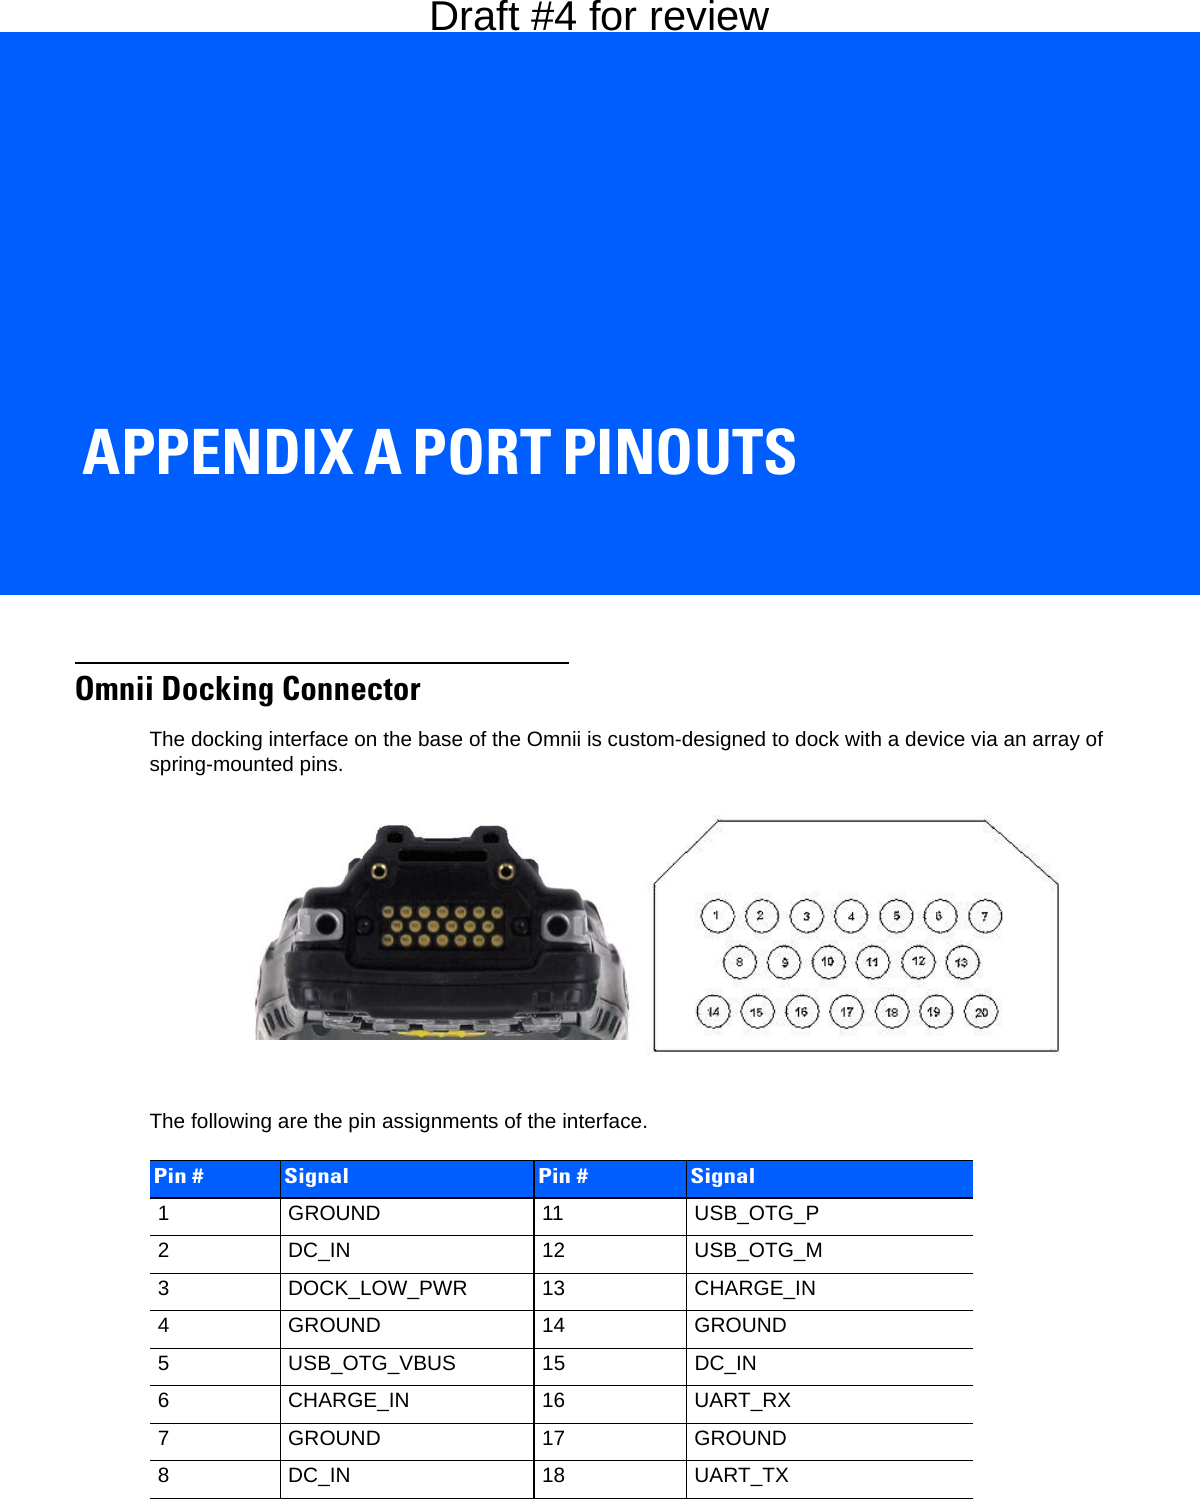 APPENDIX A PORT PINOUTSAPort PinoutsOmnii Docking ConnectorThe docking interface on the base of the Omnii is custom-designed to dock with a device via an array of spring-mounted pins. The following are the pin assignments of the interface.Pin # Signal Pin # Signal1 GROUND 11 USB_OTG_P2 DC_IN 12 USB_OTG_M3 DOCK_LOW_PWR 13 CHARGE_IN 4 GROUND 14 GROUND 5 USB_OTG_VBUS 15 DC_IN 6 CHARGE_IN 16 UART_RX 7 GROUND 17 GROUND 8DC_IN 18 UART_TXDraft #4 for review